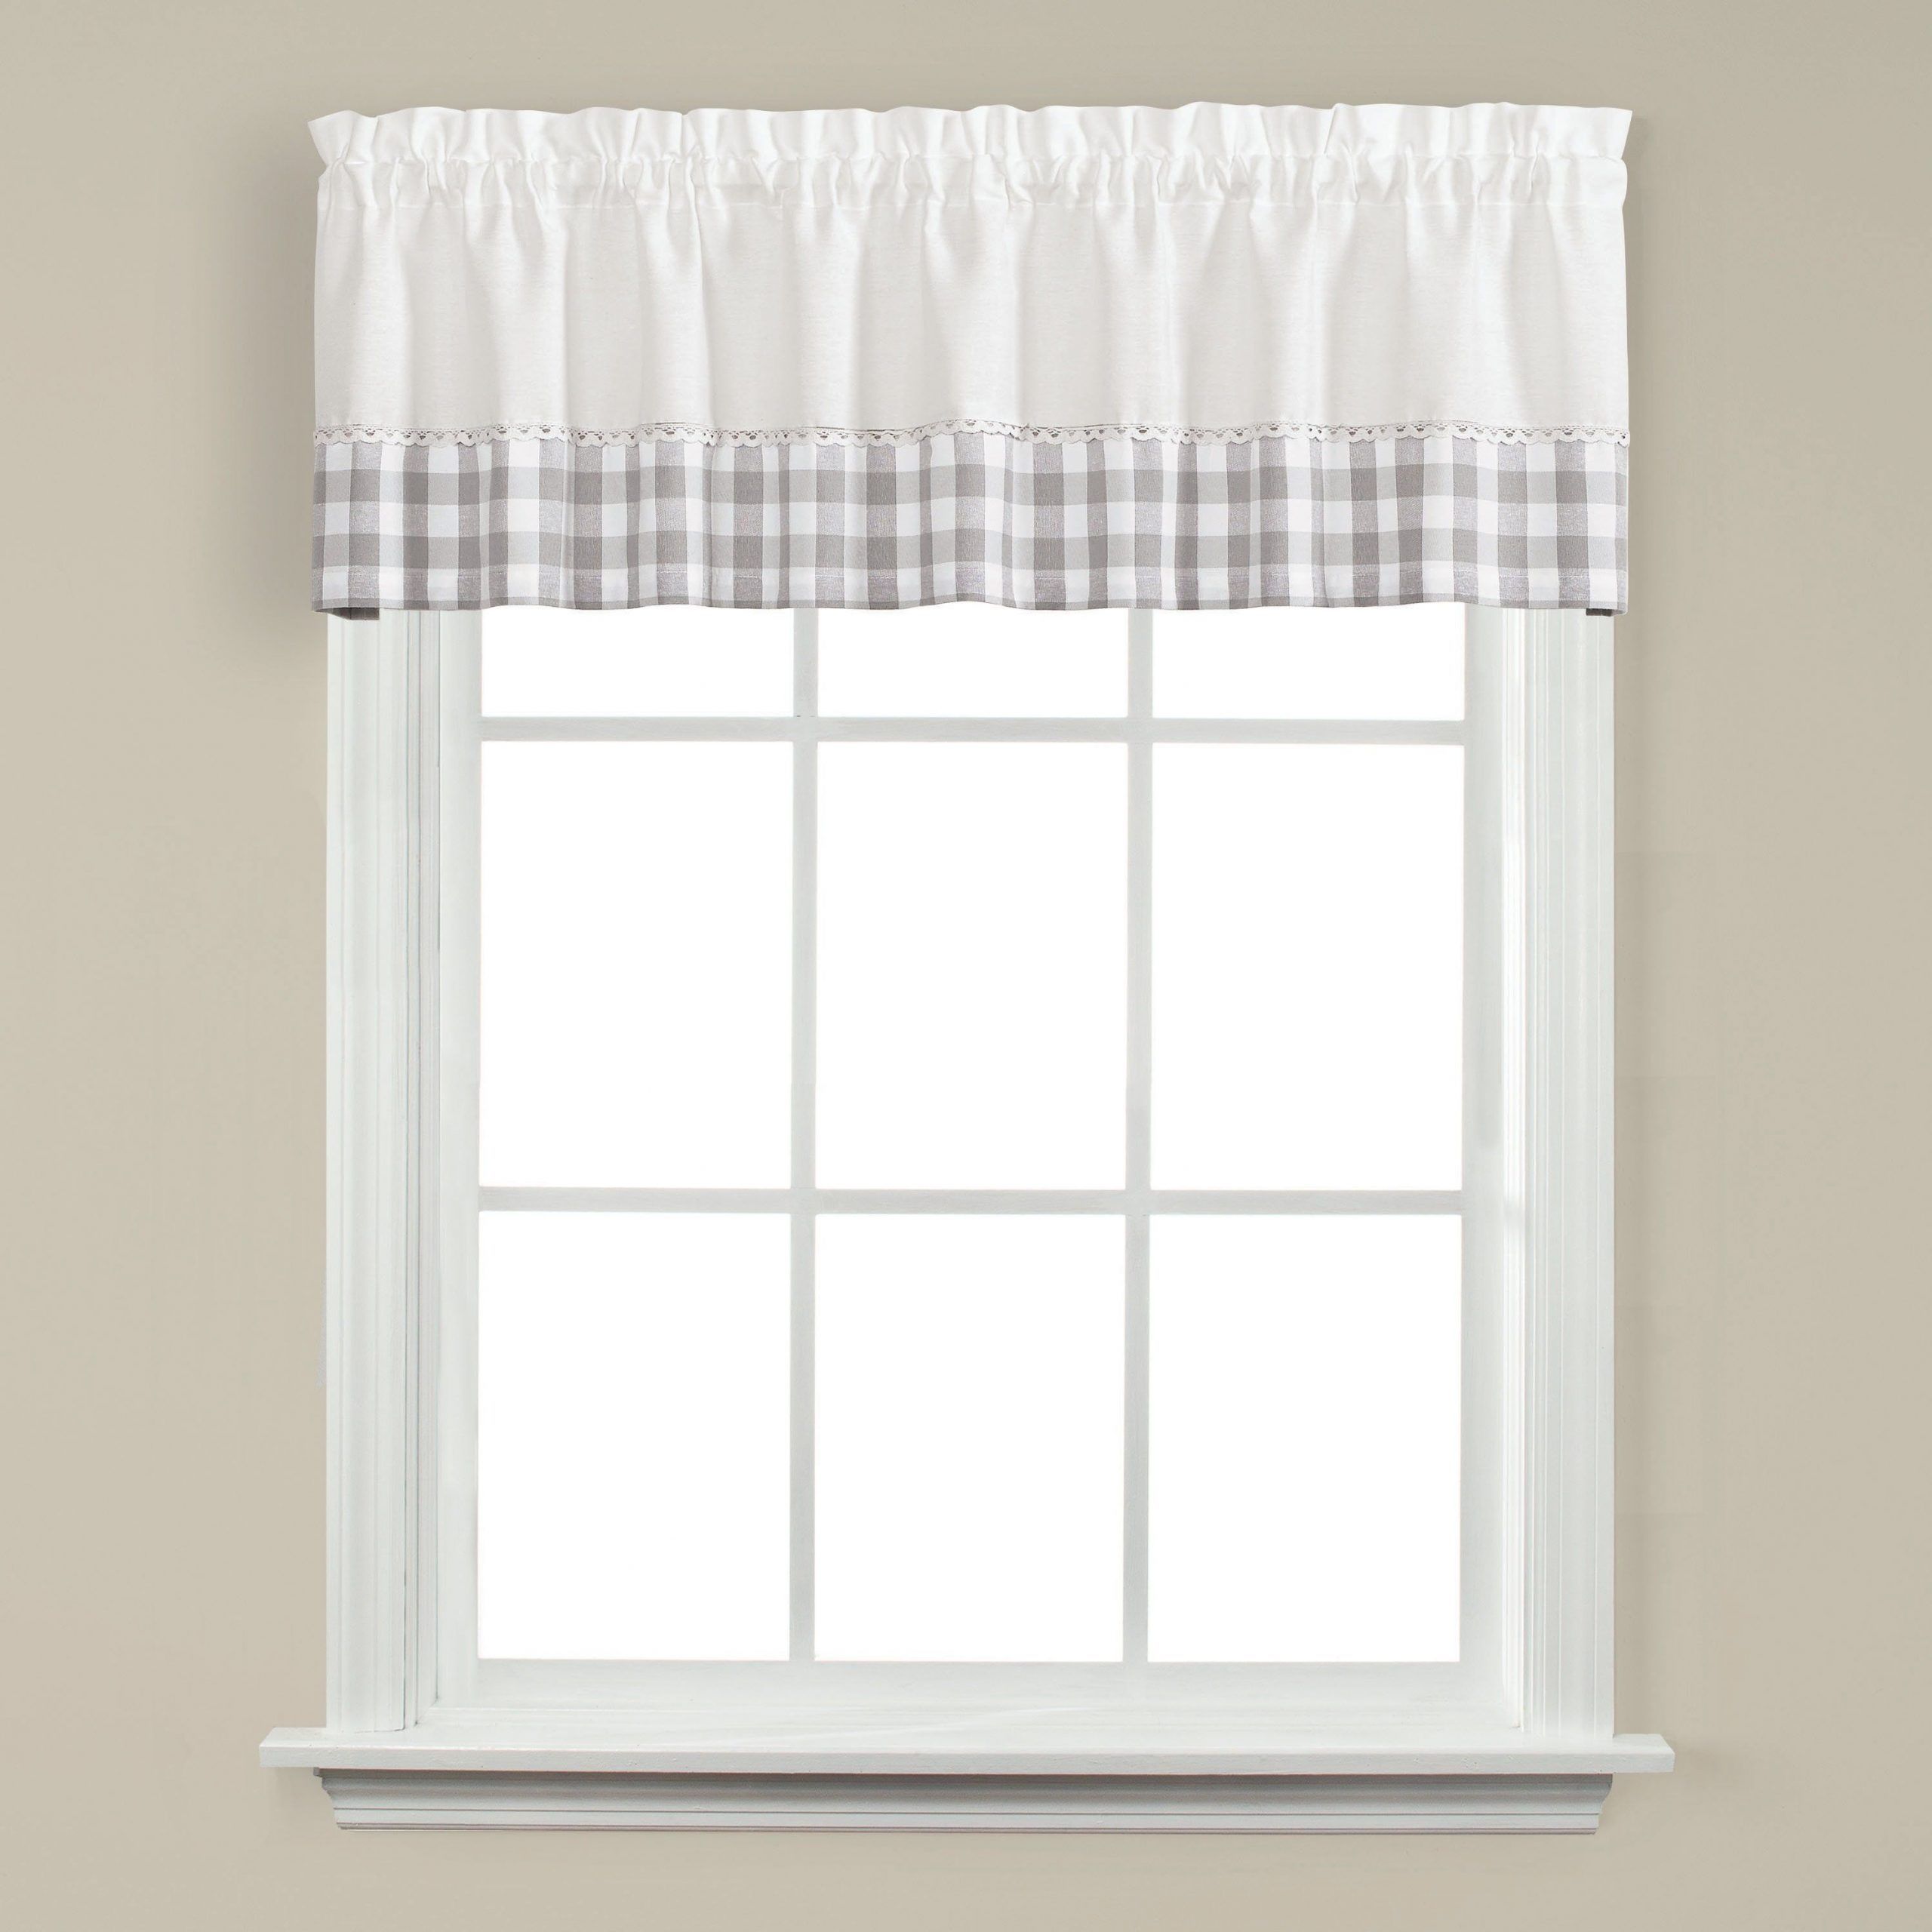 Skl Home Cumberland 13 Inch Valance In Dove Gray, Grey Intended For Dove Gray Curtain Tier Pairs (View 6 of 20)